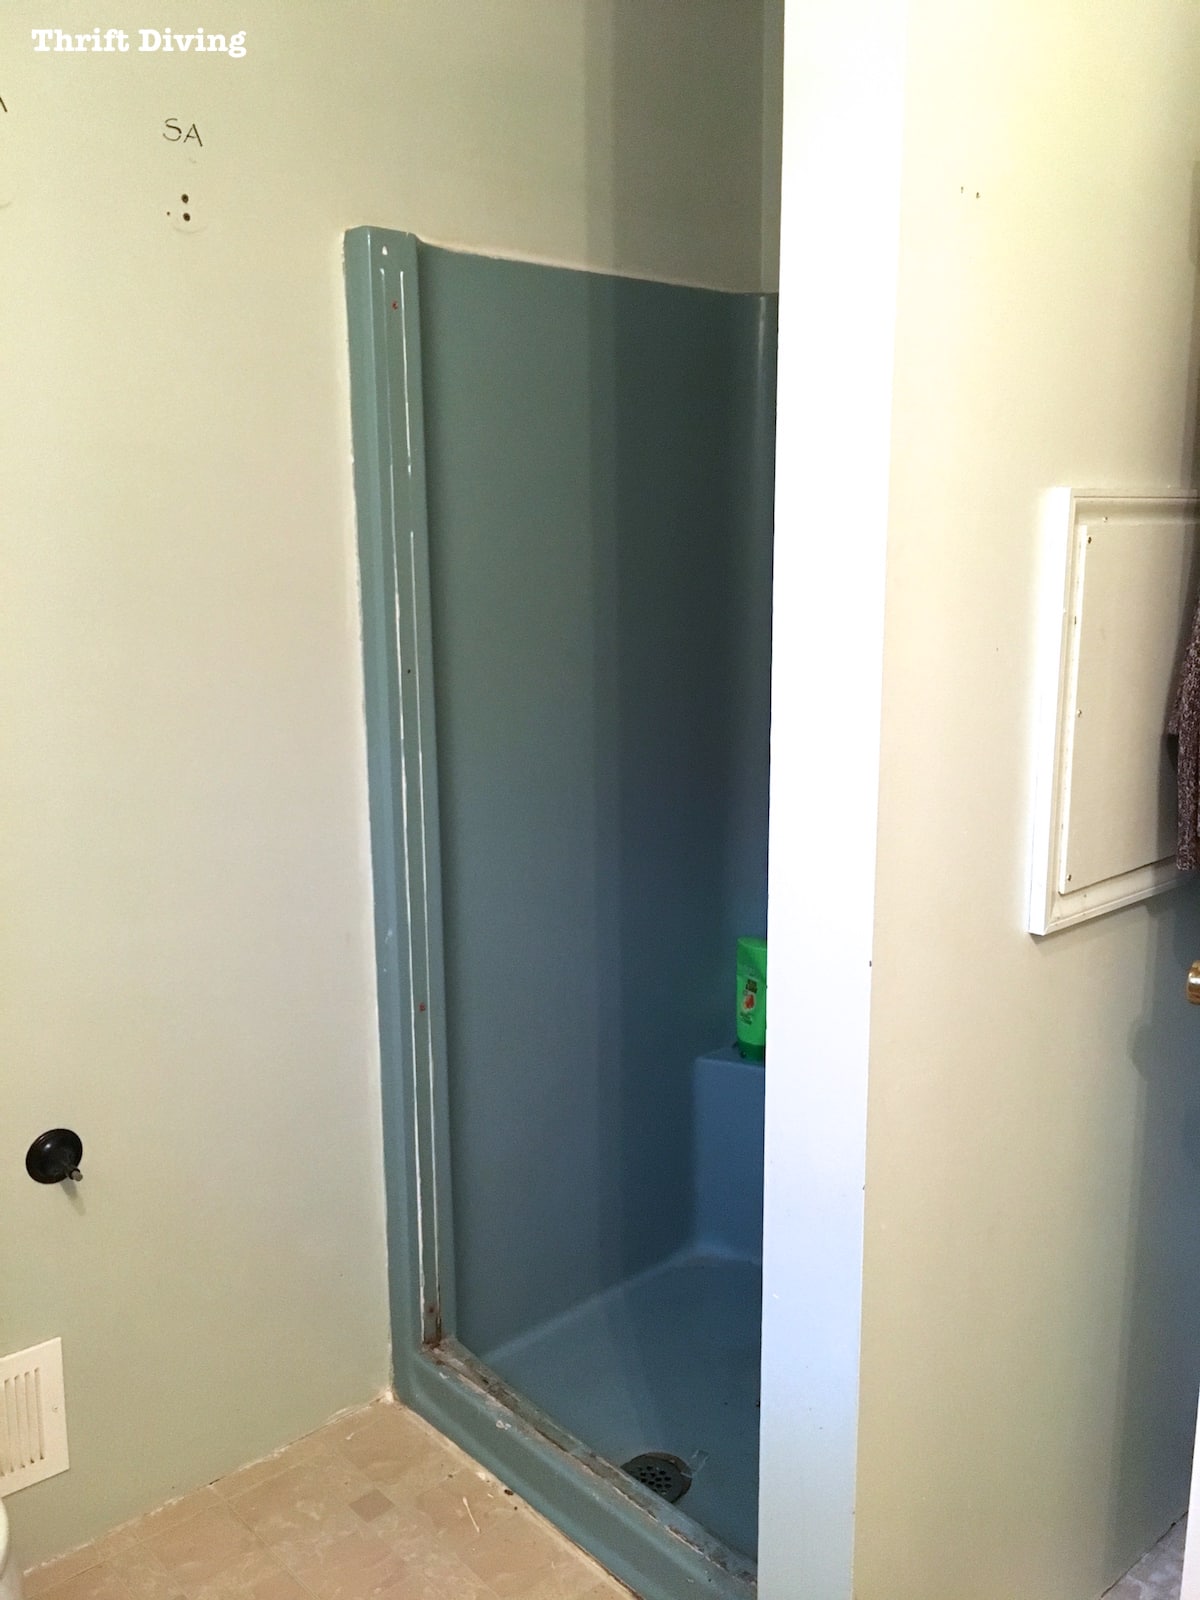 Pretty Lavender Bathroom Makeovers - Shower and tub refinishing with a 1970's turquoise shower stall. - Thrift Diving